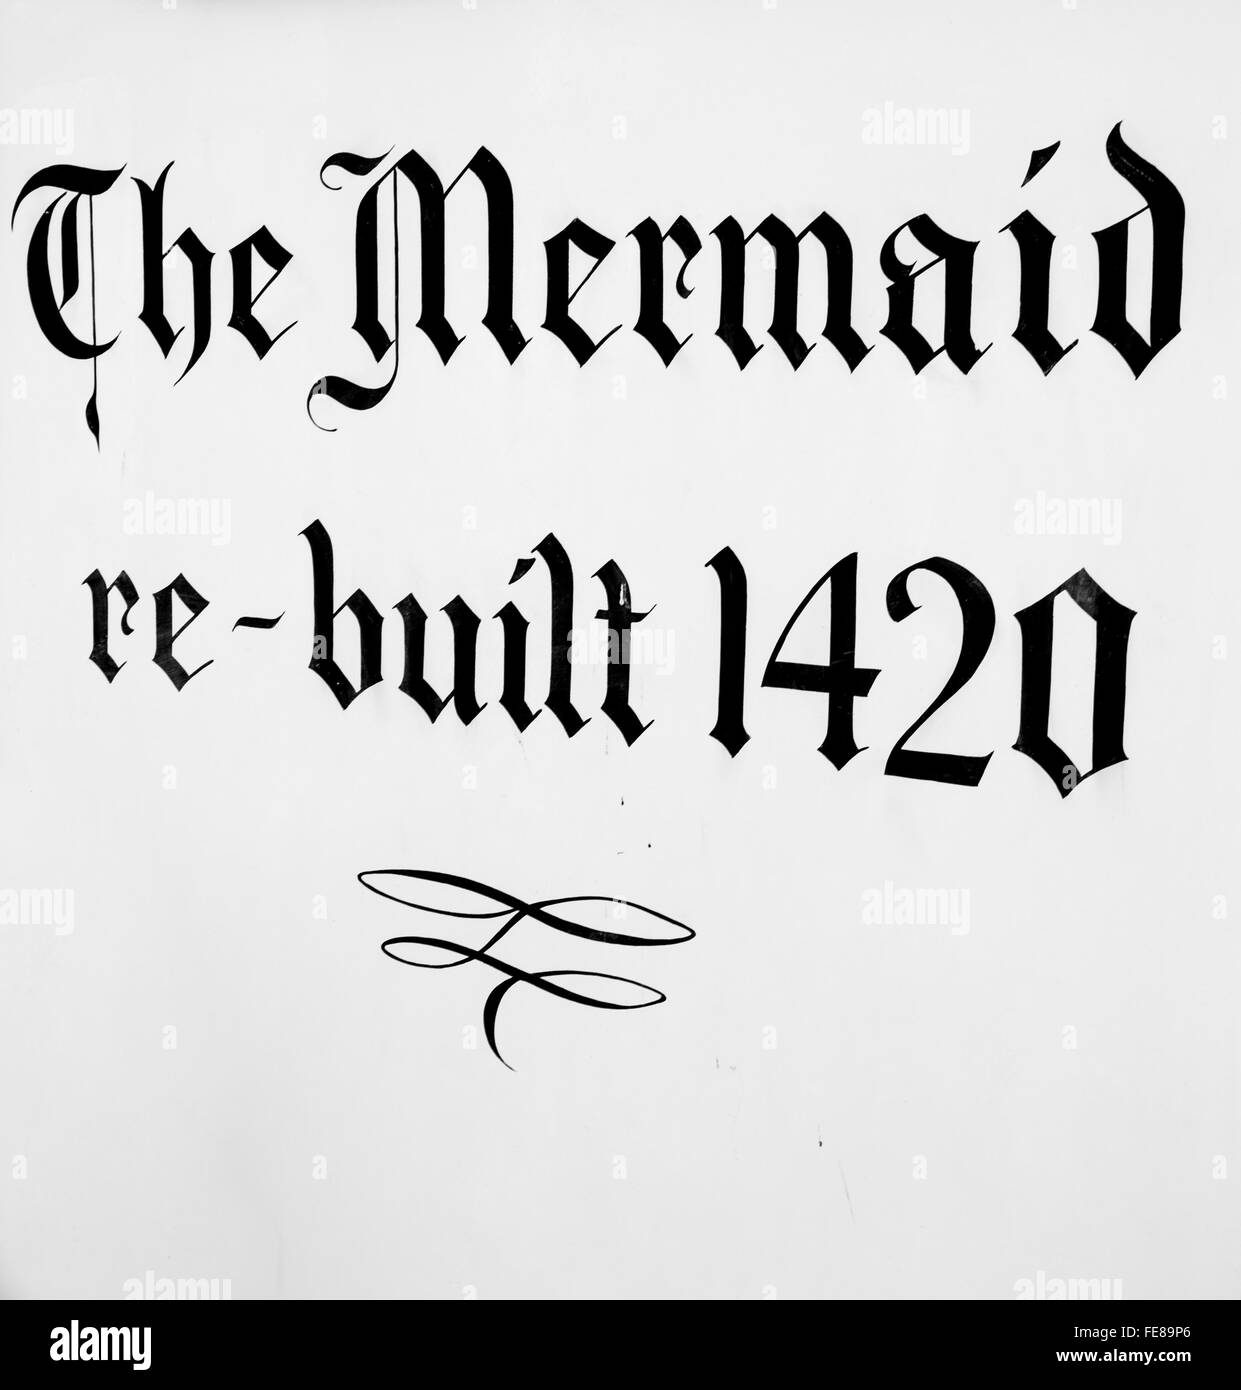 Sign painted on the building of The Mermaid Inn in Rye, East Sussex, UK. Rebuilt in 1420, now a popular inn and hotel. Stock Photo